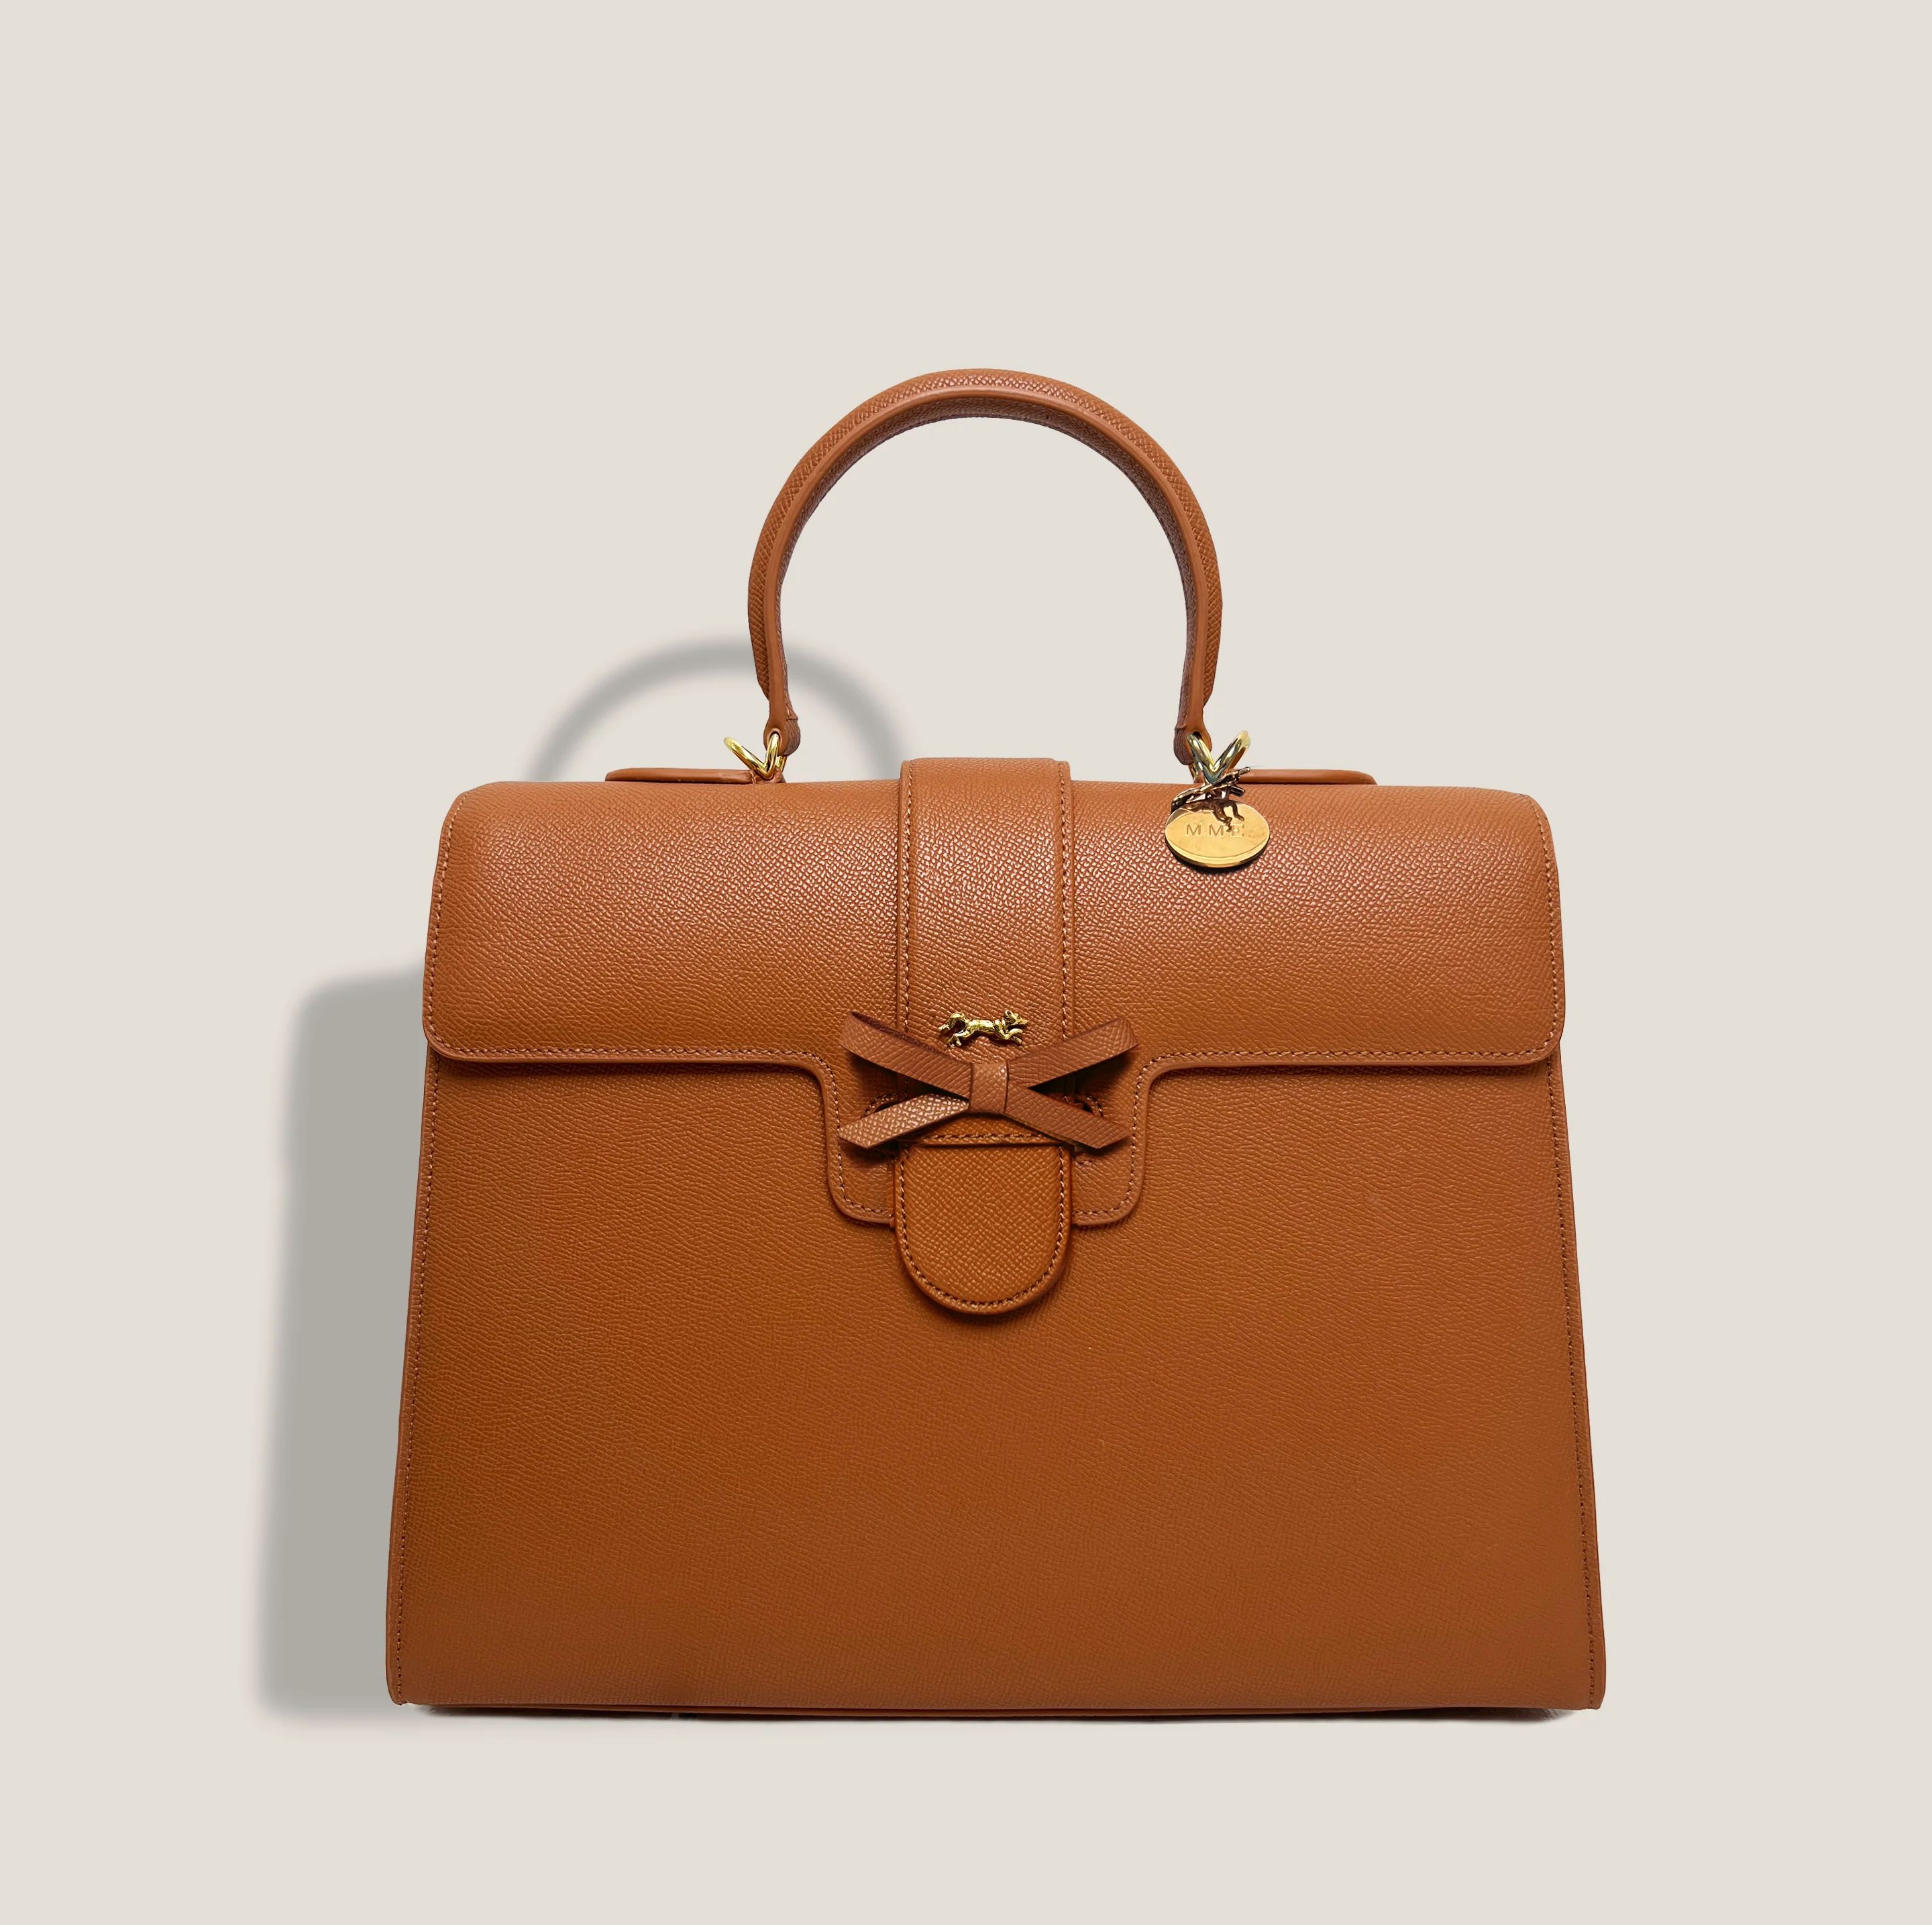 THE CARLTON BOW BAG in COGNAC* | MME.MINK